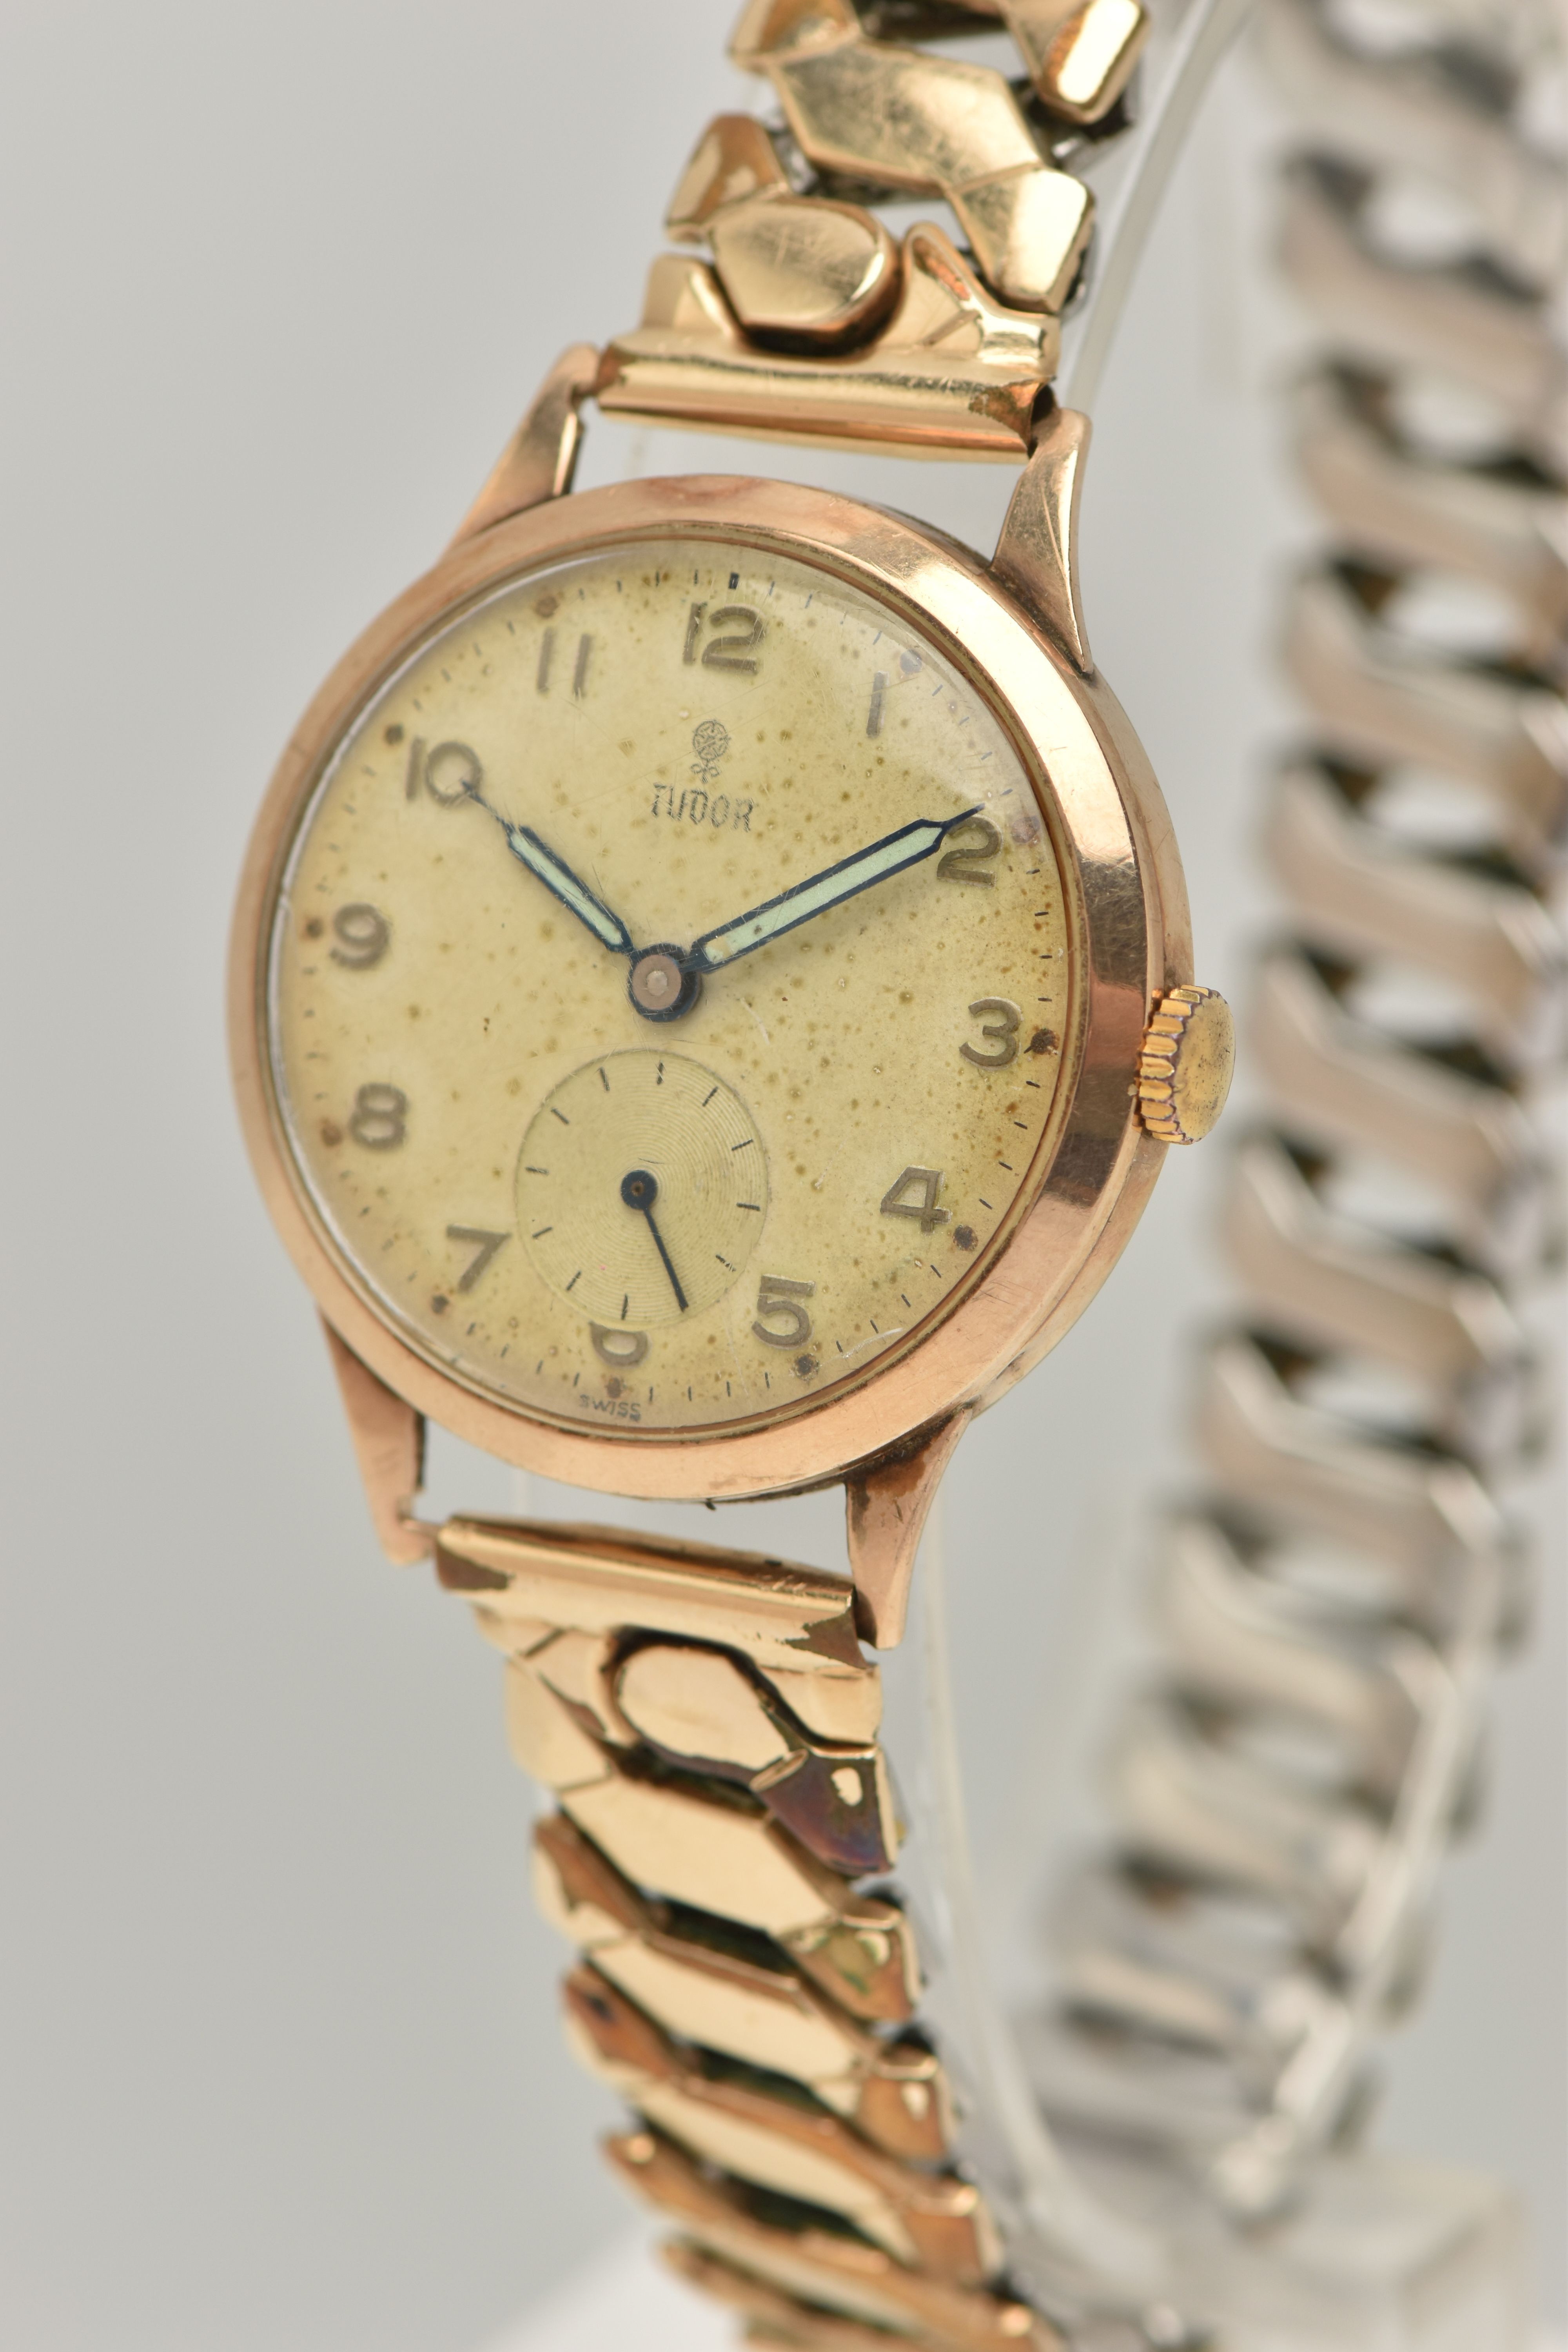 A 9CT GOLD 'TUDOR' WRISTWATCH, hand wound movement, round dial signed 'Tudor', Arabic numerals, - Image 3 of 6